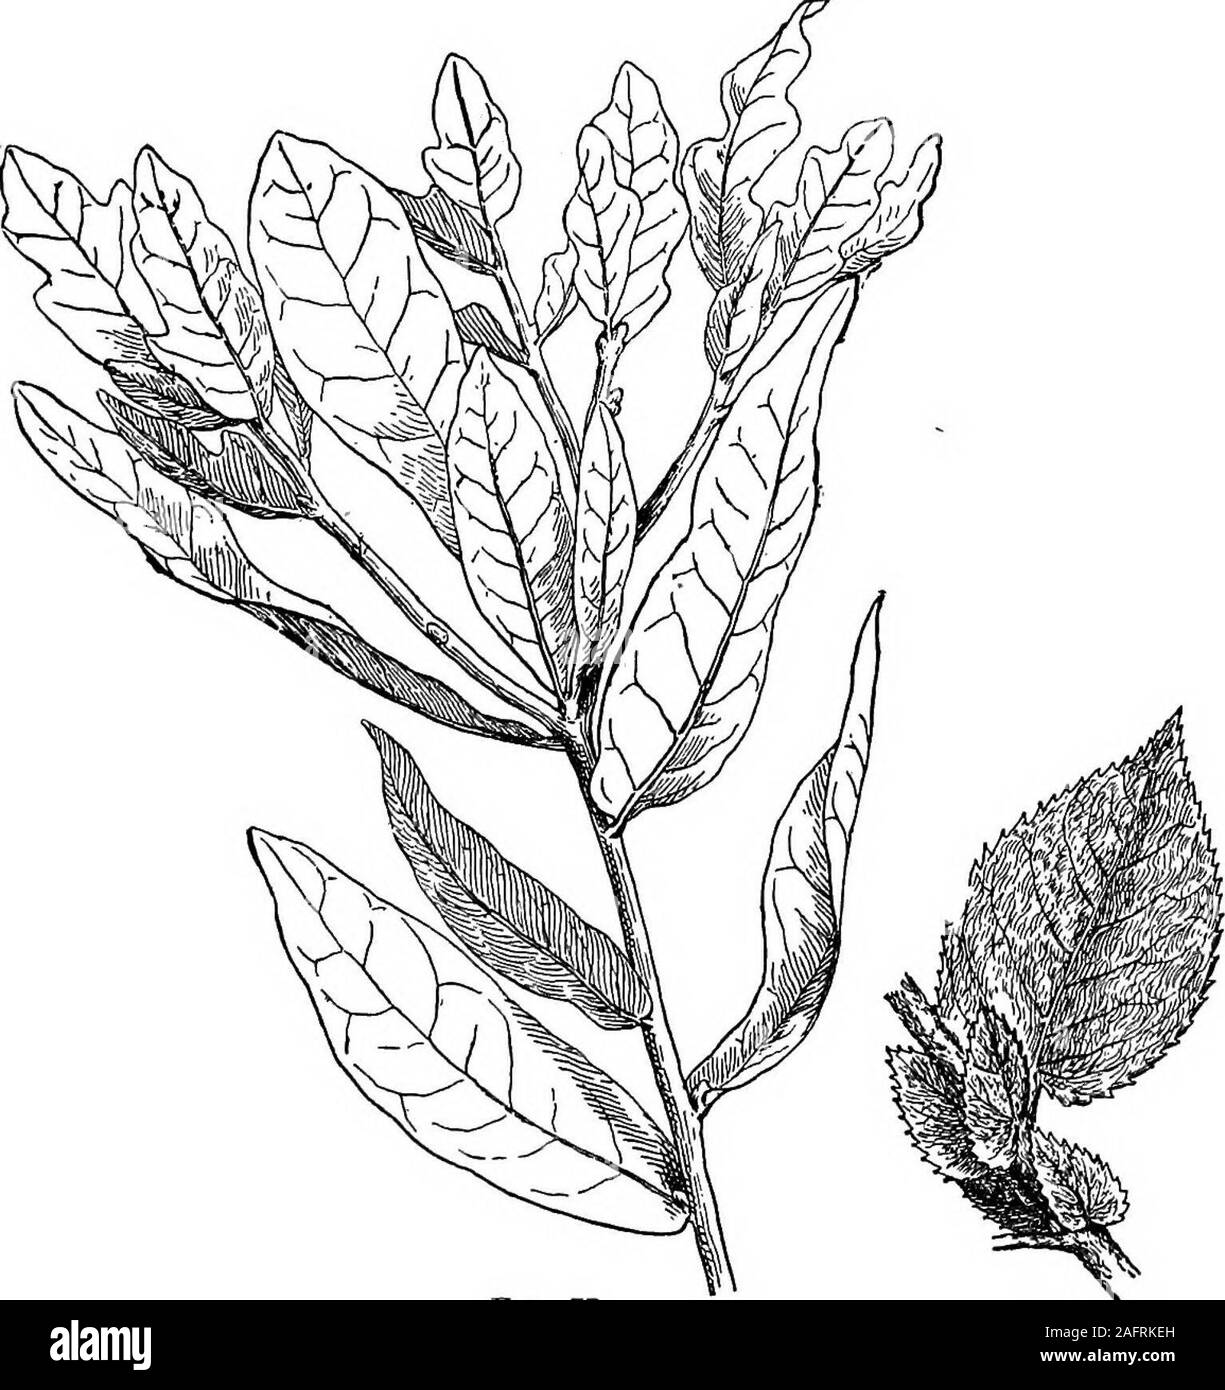 . Lessons with plants. Suggestions for seeing and interpreting some of the common forms of vegetation. Fig. 75.Honeysuckle. Fig. 7C.Black walnut. scales; therefore, the scales must represent trans-formed petioles, not transformed blades. If theenlarged and green bud-scales of the Norway maple G 82 LUSSOIfS WITS PLANTS (Fig. 50) are petioles, we have an example ofleaf-stalks which perform functions of leaf-blades.. Fio. 77.Various leaves of live oalc. Fio. 78.Leaf of a. willow. 88. The leaf of a willow is shown in Fig. 78The stipules are so leaf-like as to indicate that they THS PARTS OF LEA FJ Stock Photo